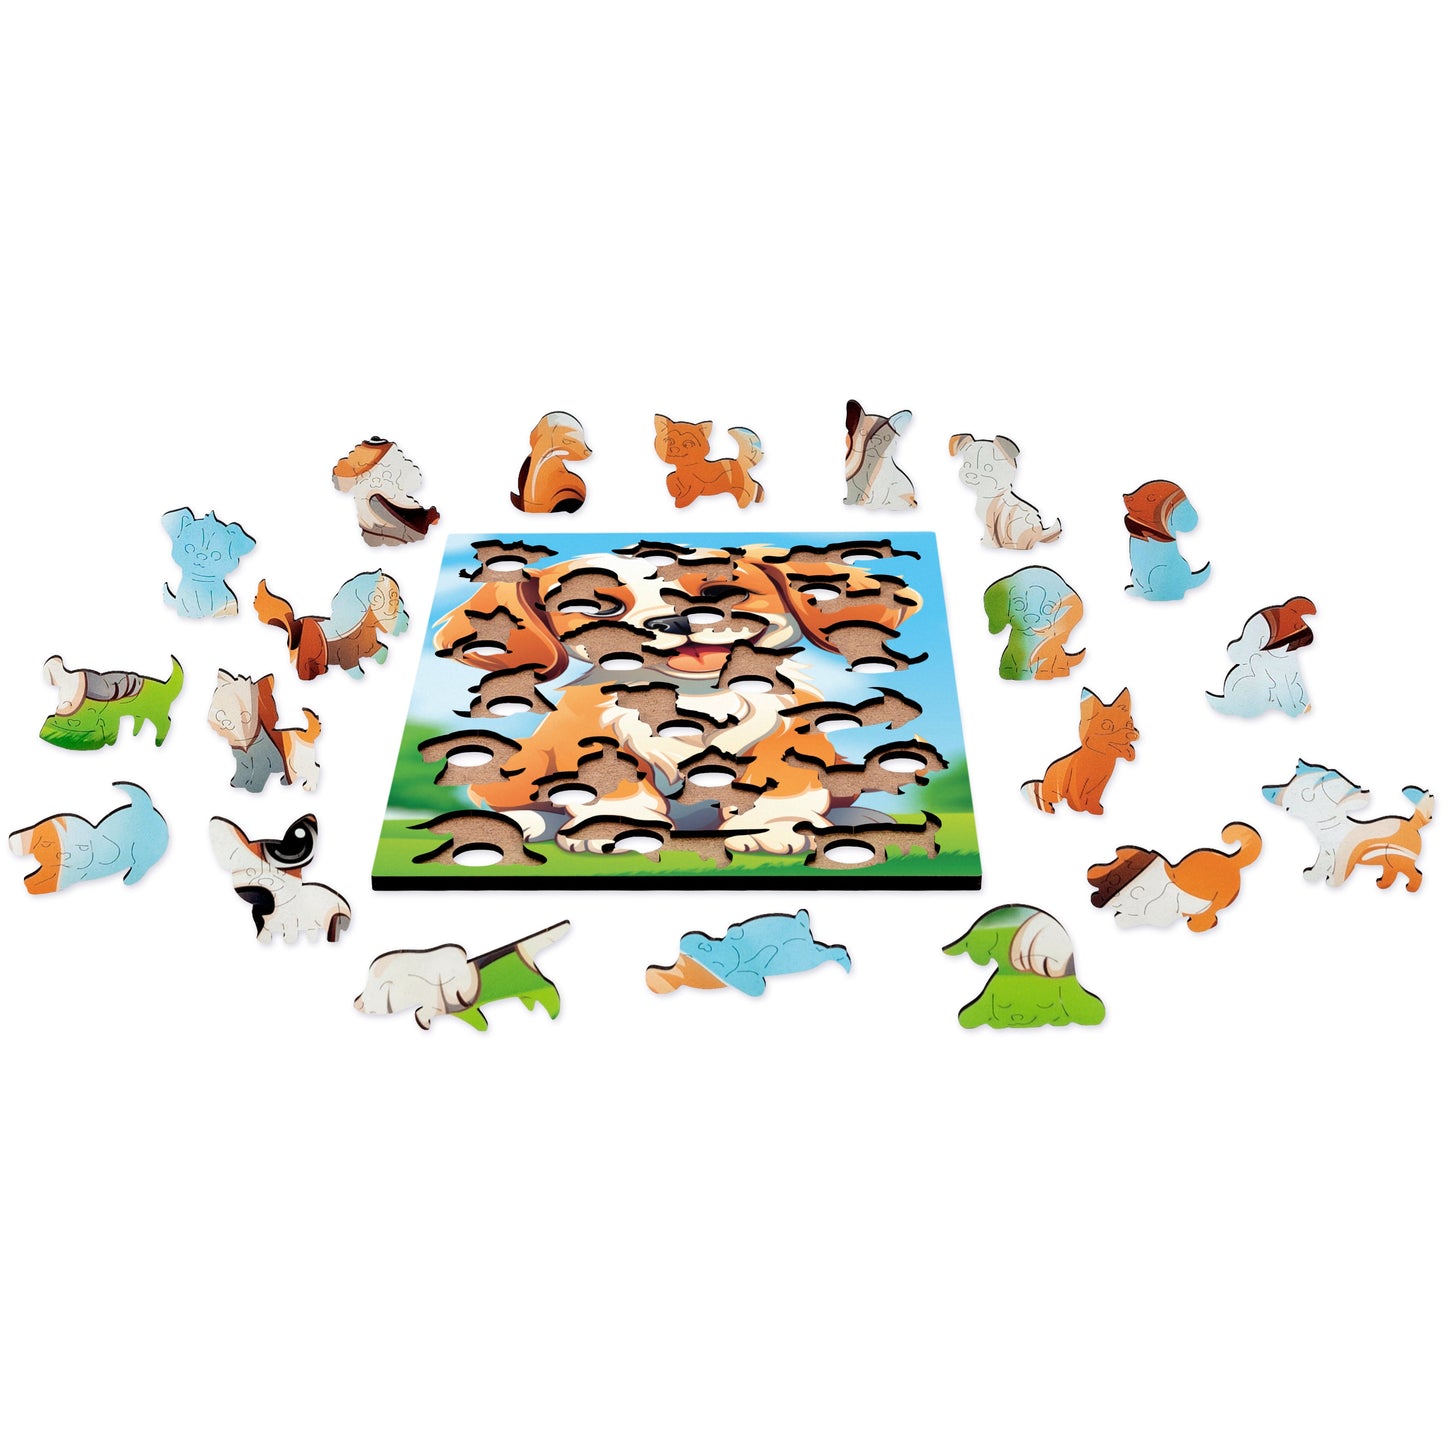 Curious Puppy 🐶 Wooden Puzzle - Fun Learning Toy Active Puzzles